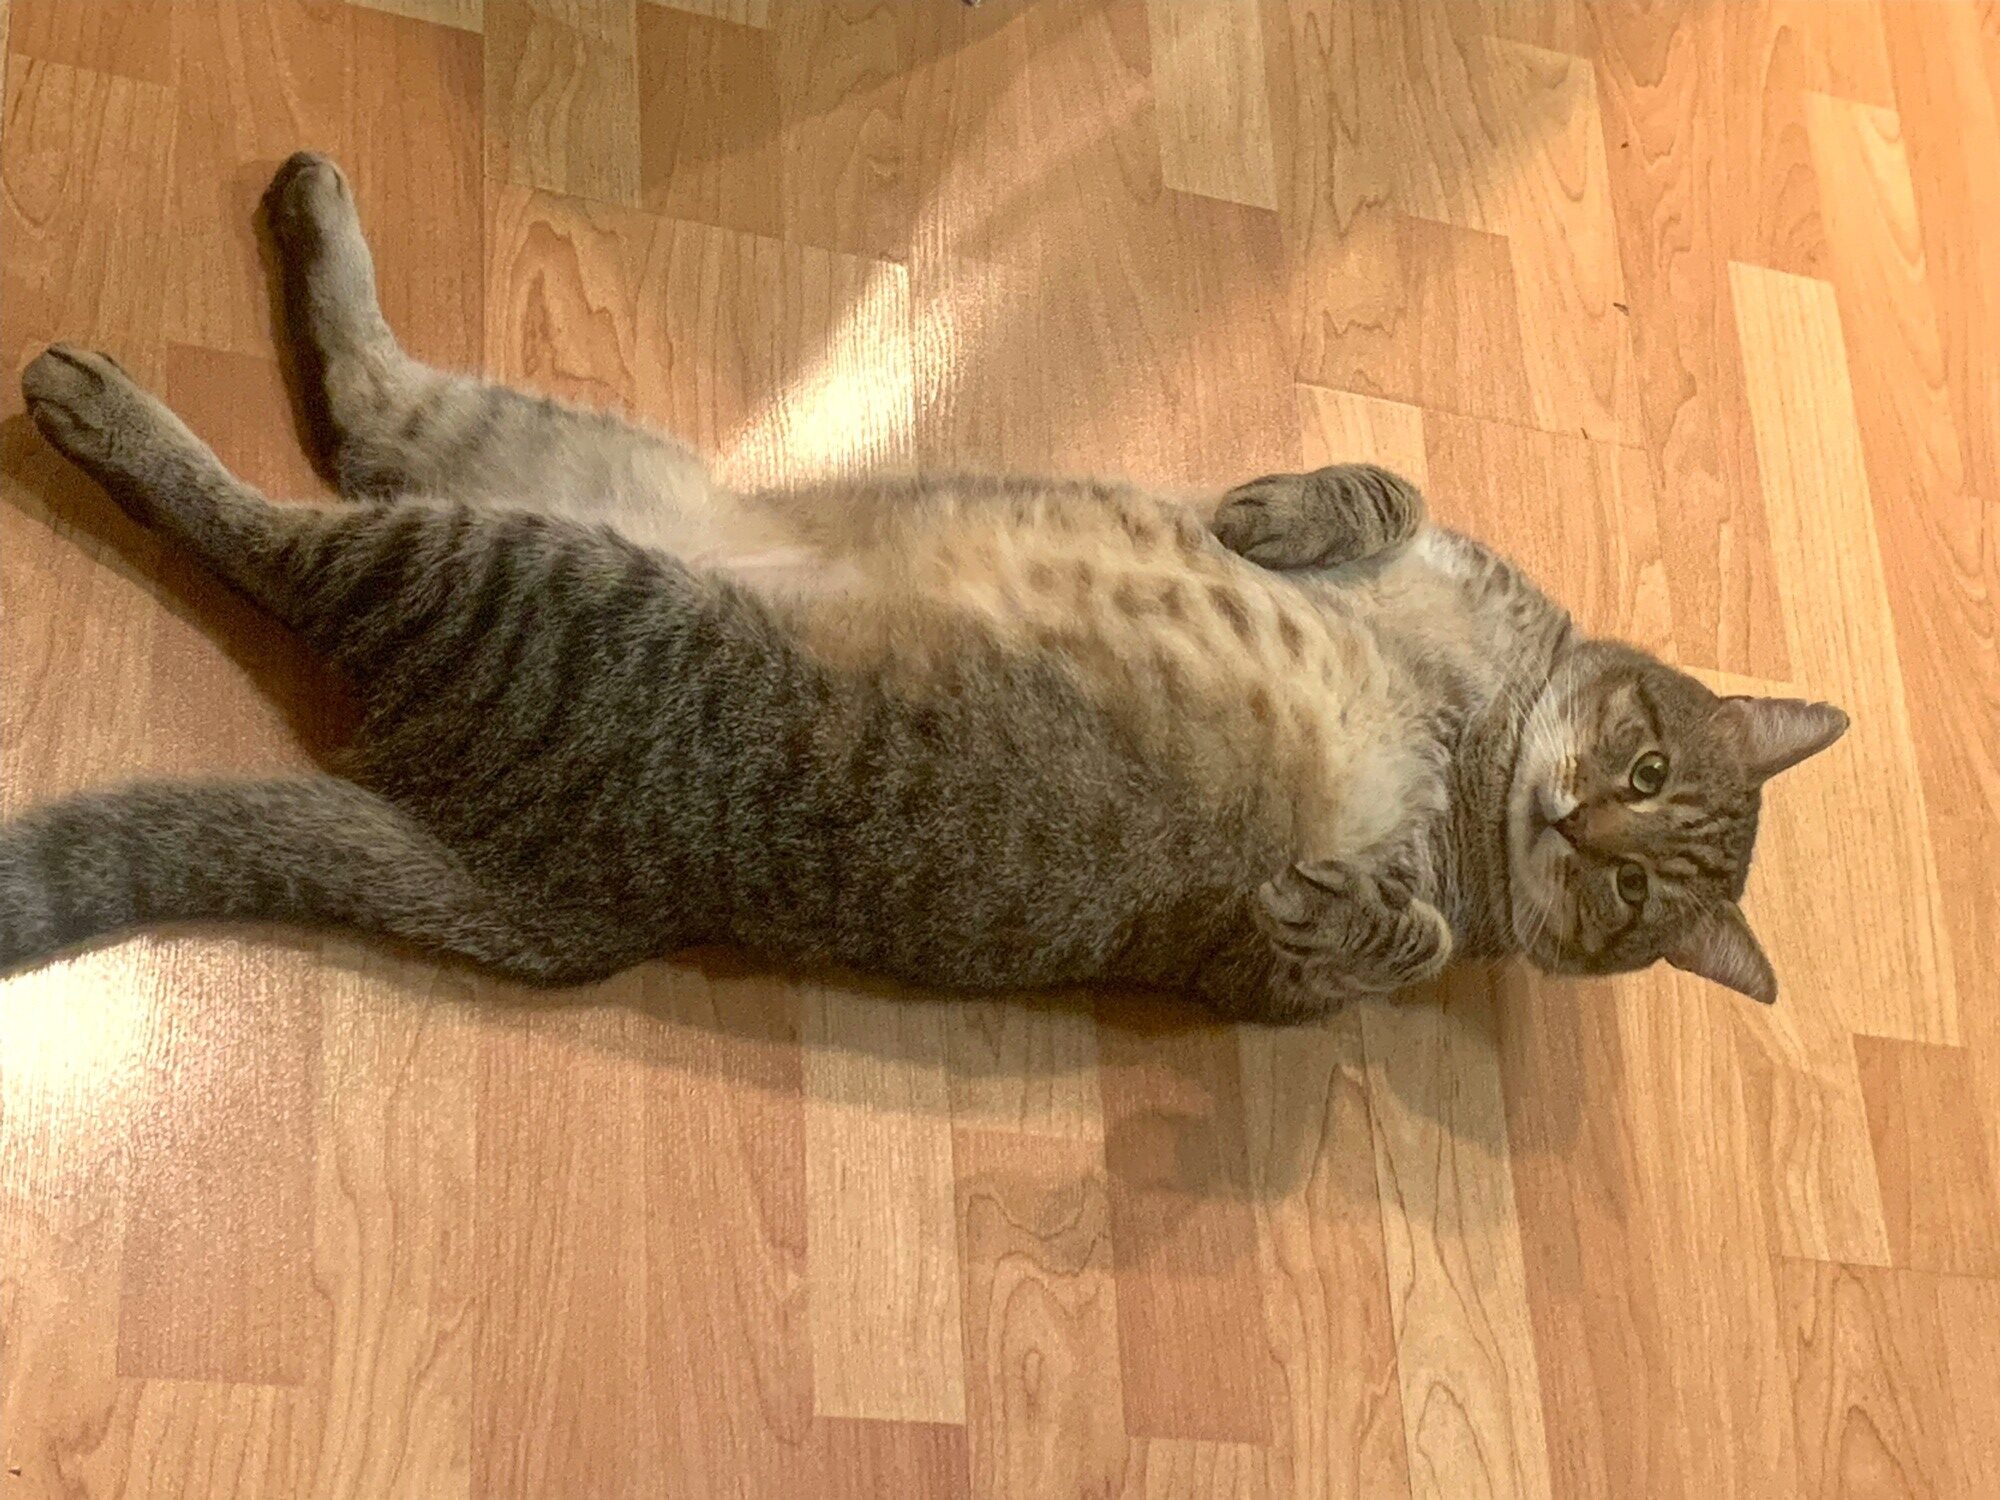 A gray tabby named Carlos lies on his back and looks at the camera